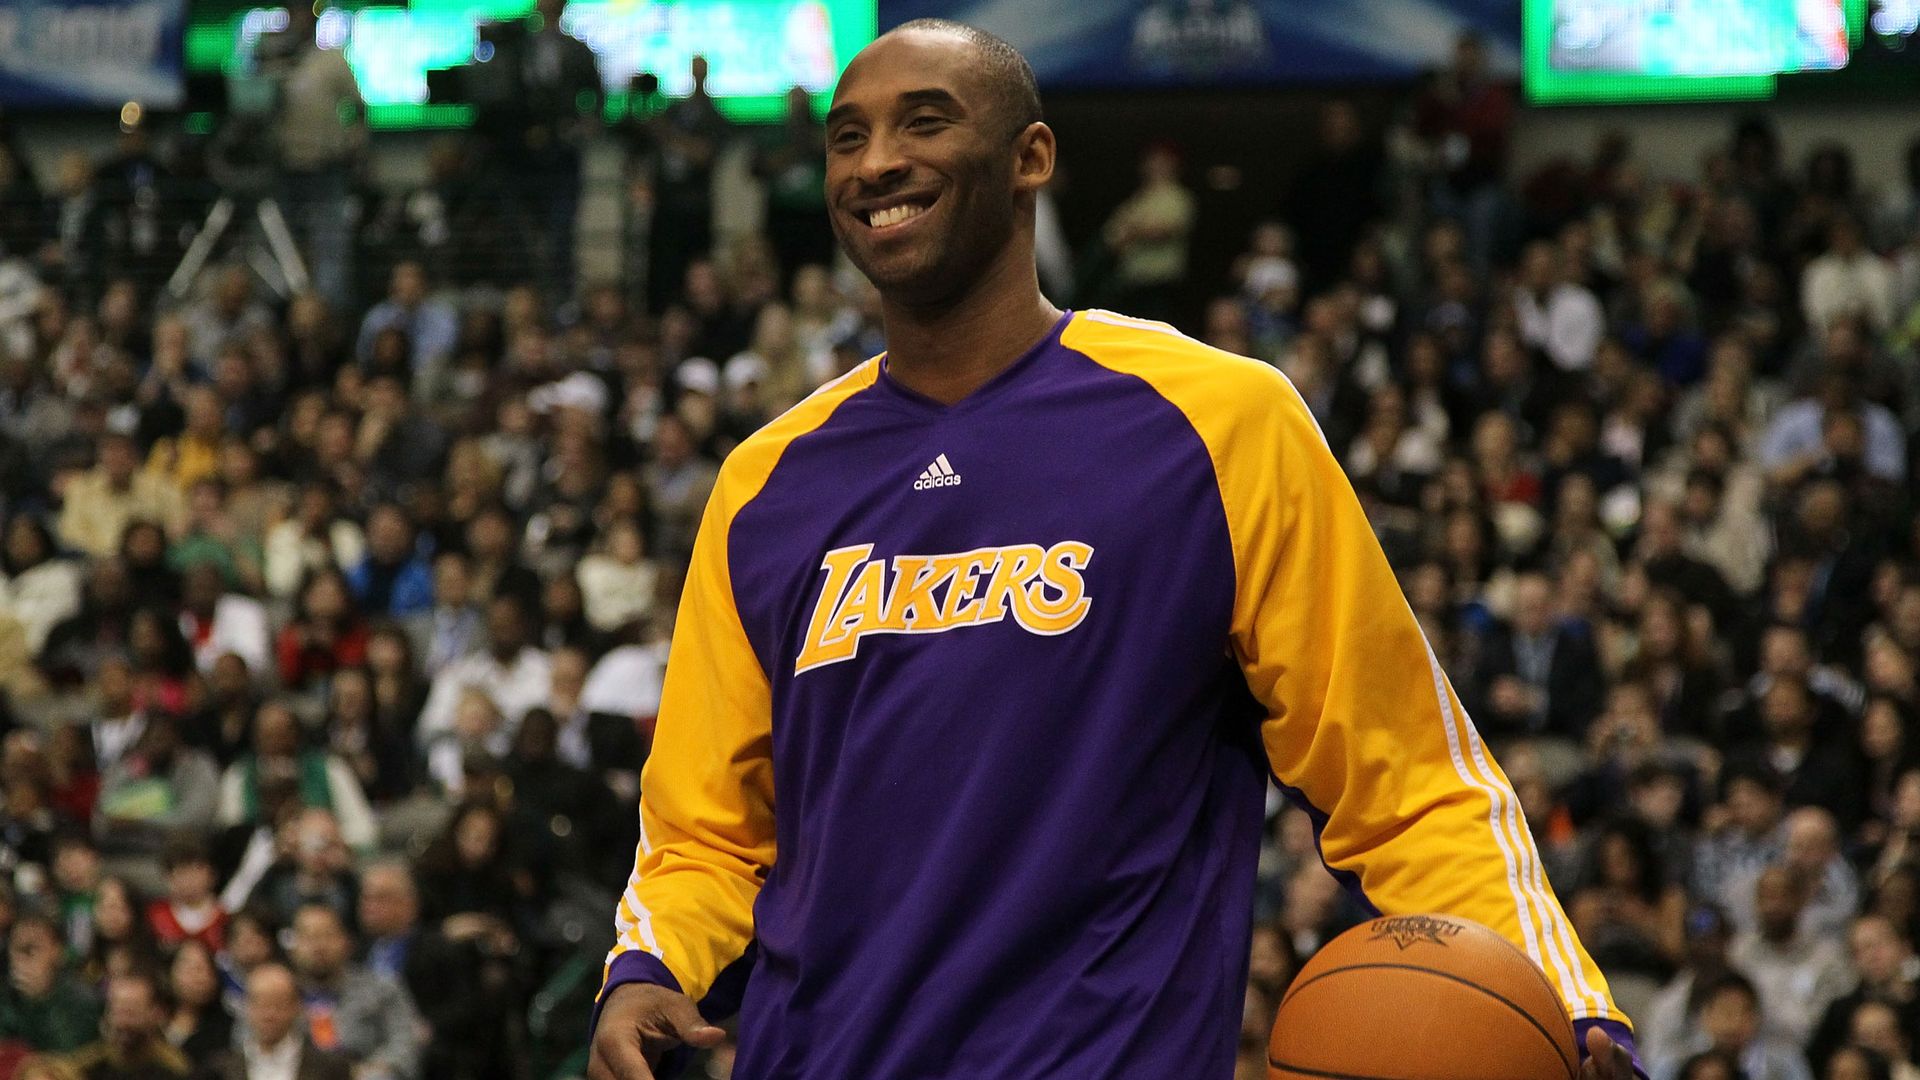 NBA Legend Kobe Bryant Was a 'Philly Guy Through and Through